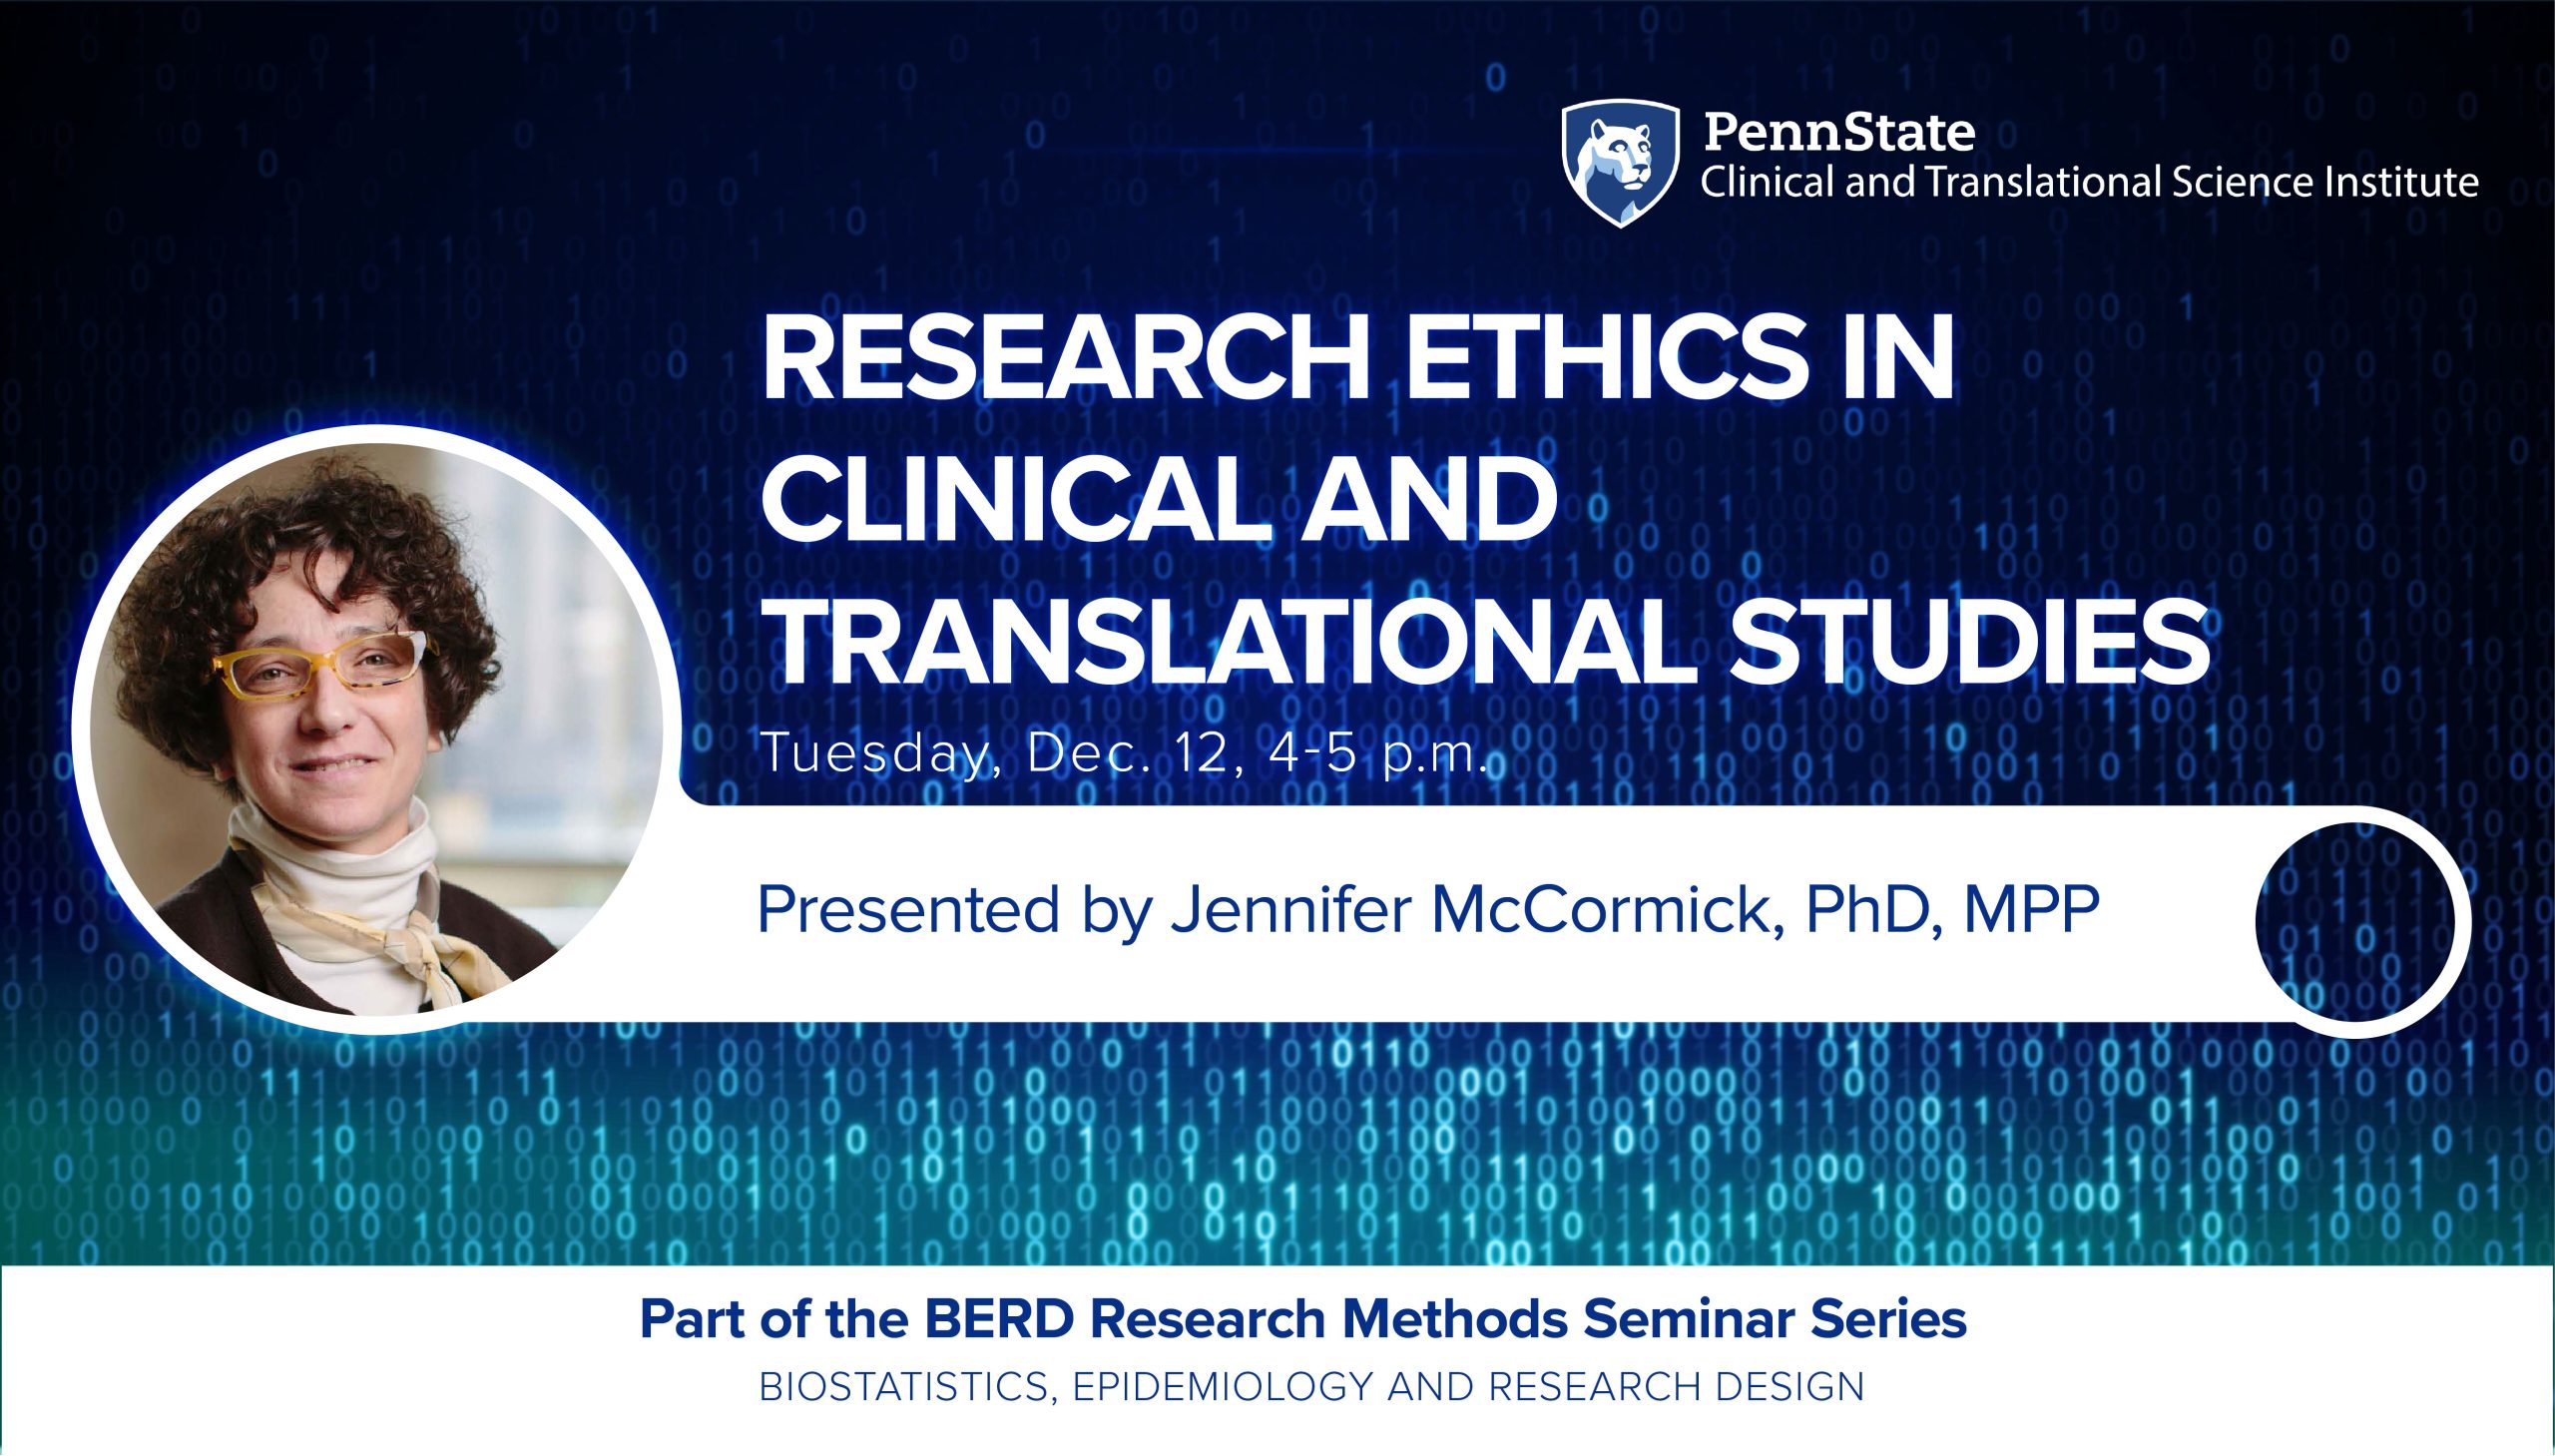 Research Ethics in Clinical and Translational Studies